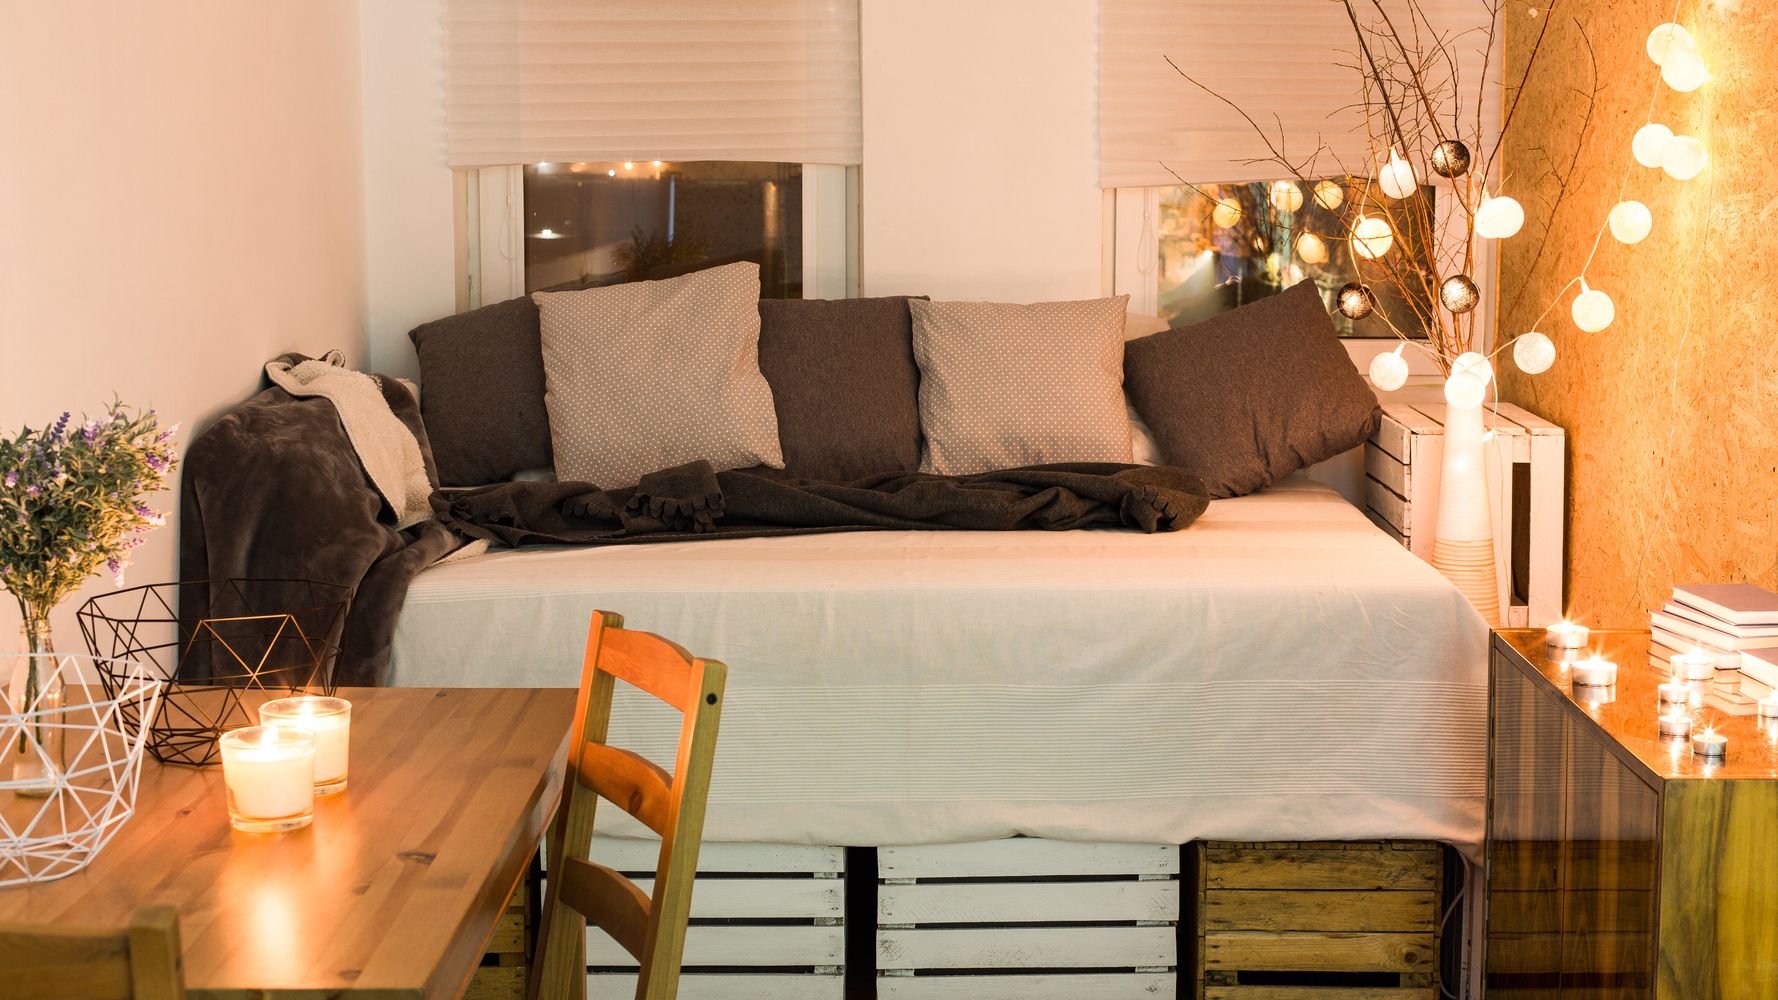 Student Bedroom Ideas How To Style Your Room On A Budget